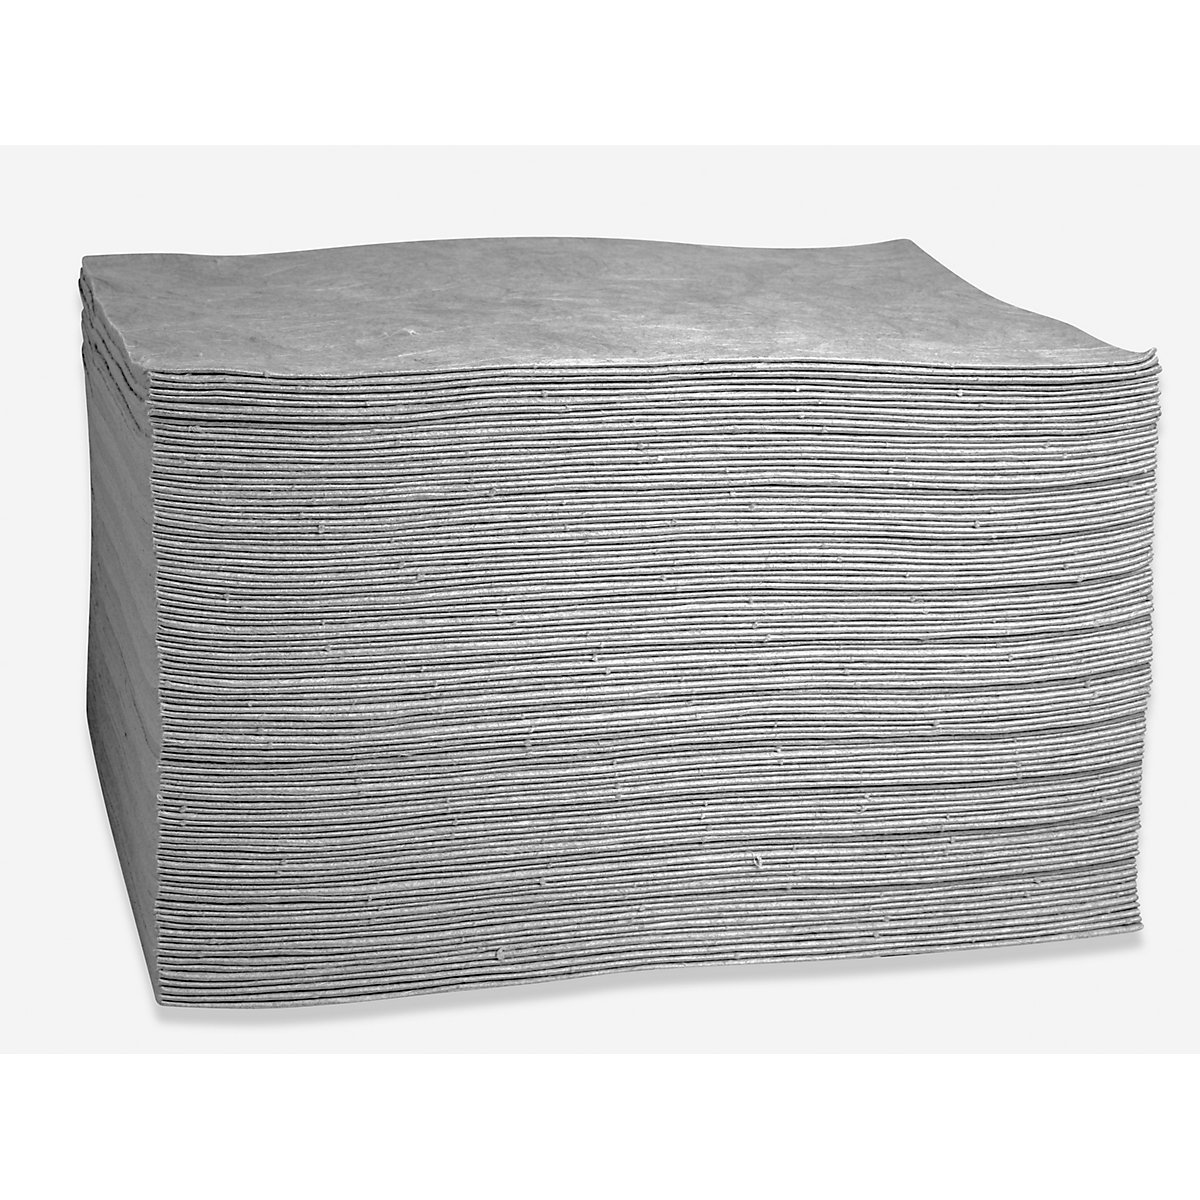 FIRST absorbent sheeting, sheets, heavy version, universal, 500 x 400 mm, pack of 100-15